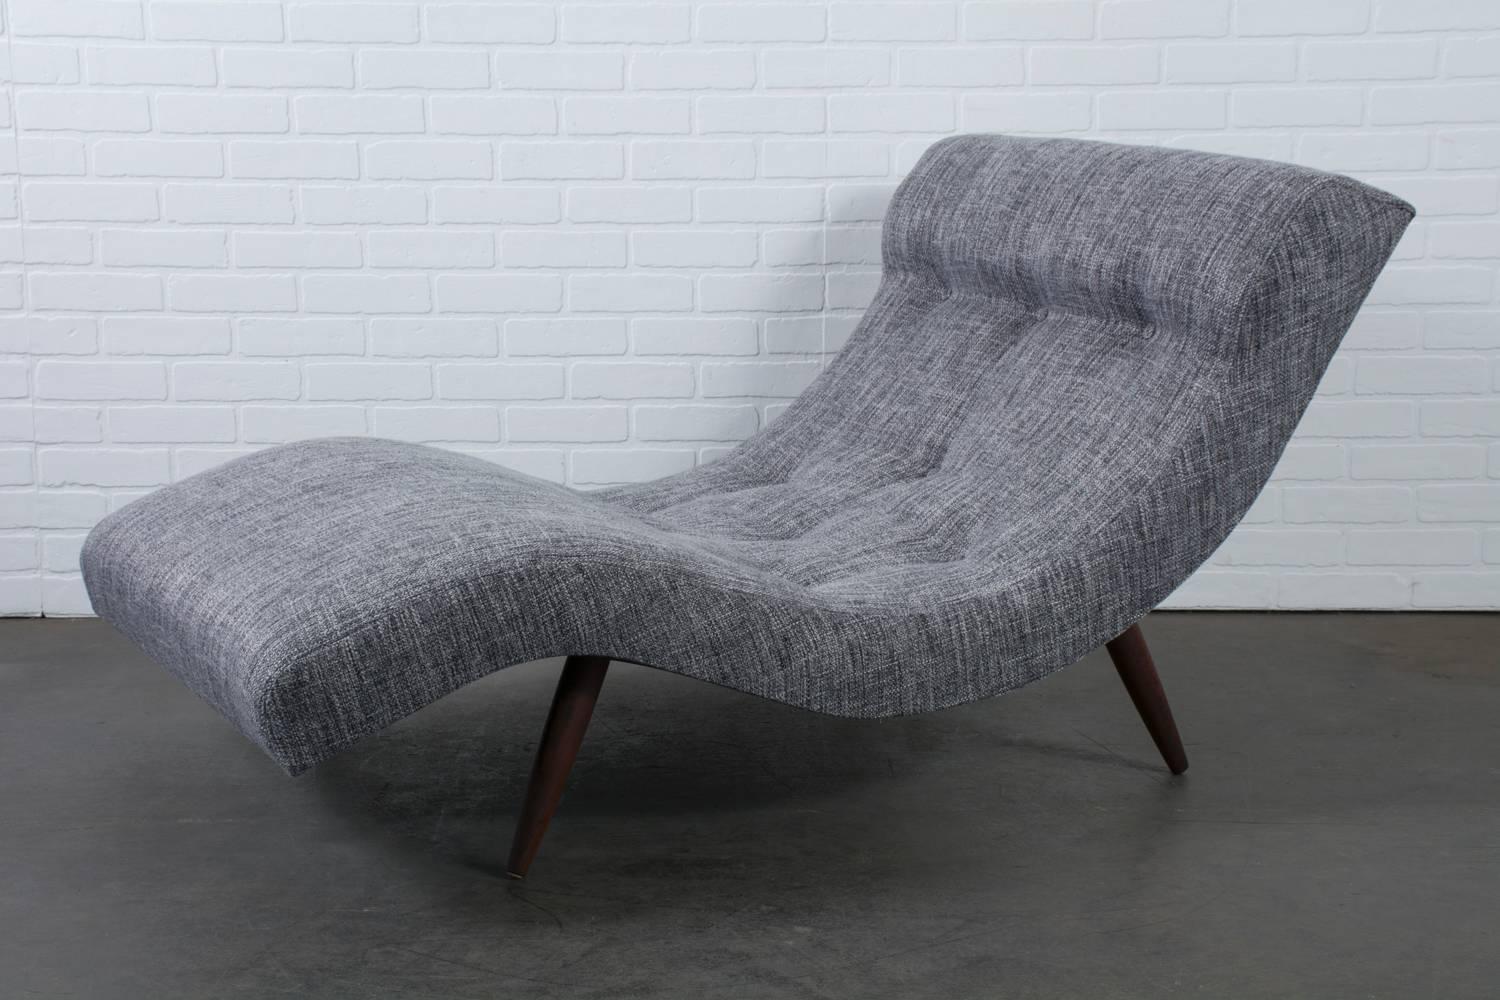 Mid-20th Century Vintage Mid-Century Grey Chaise Longue by Adrian Pearsall for Craft Associates